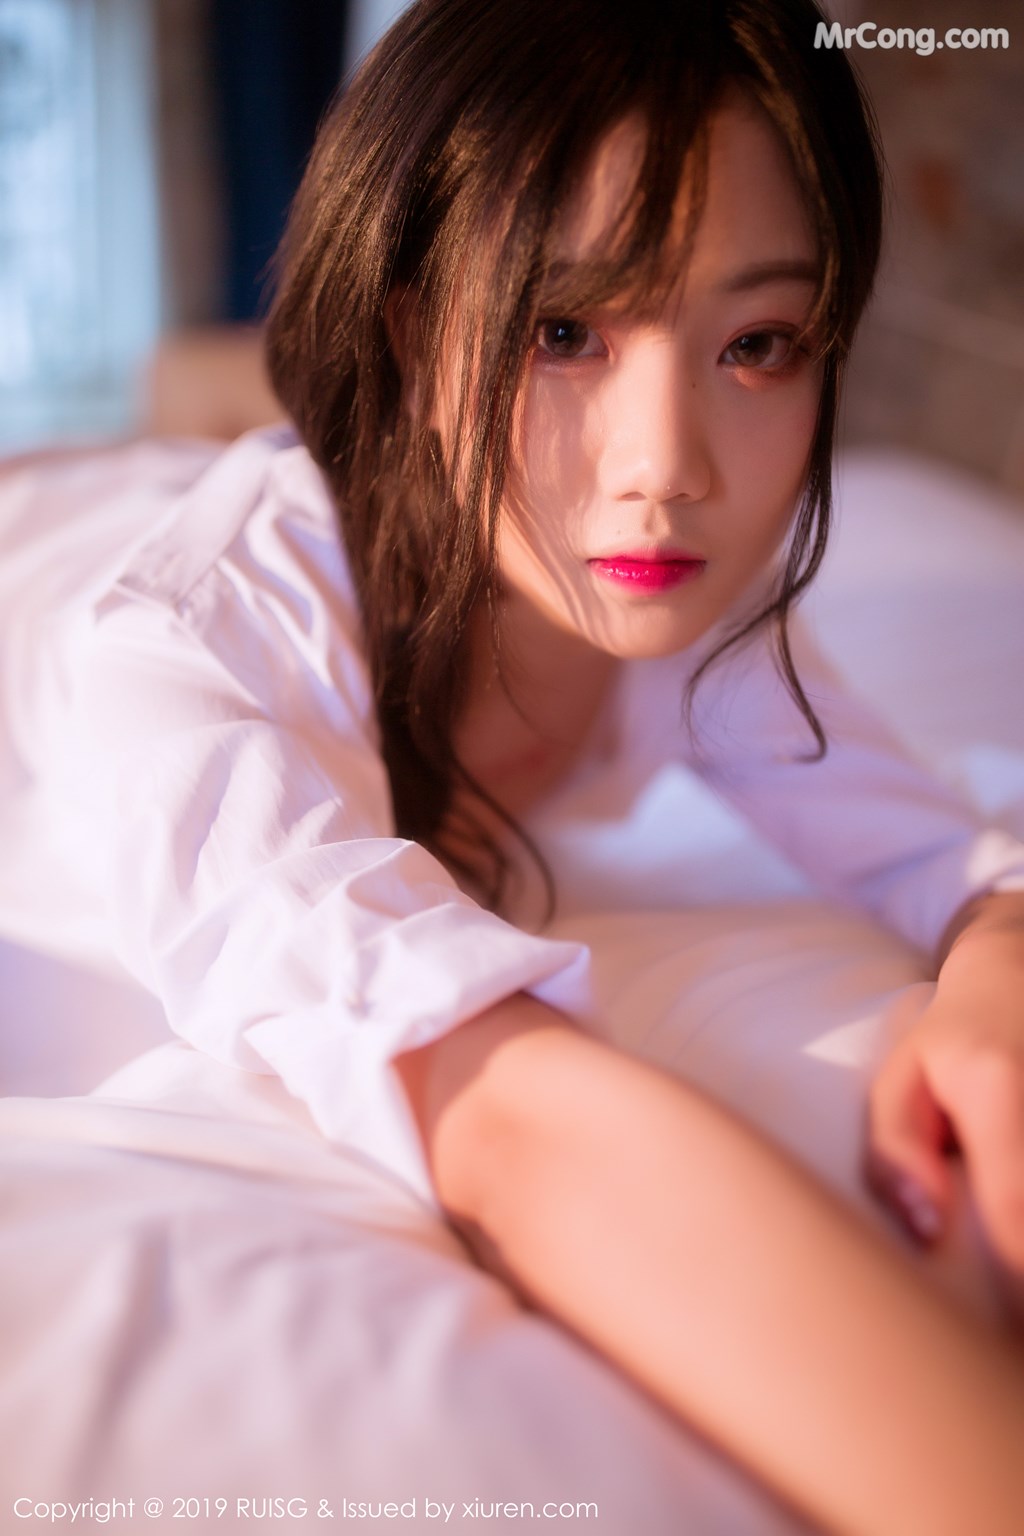 RuiSG Vol.087: 人间 不 值得 lily (43 pictures) photo 1-2